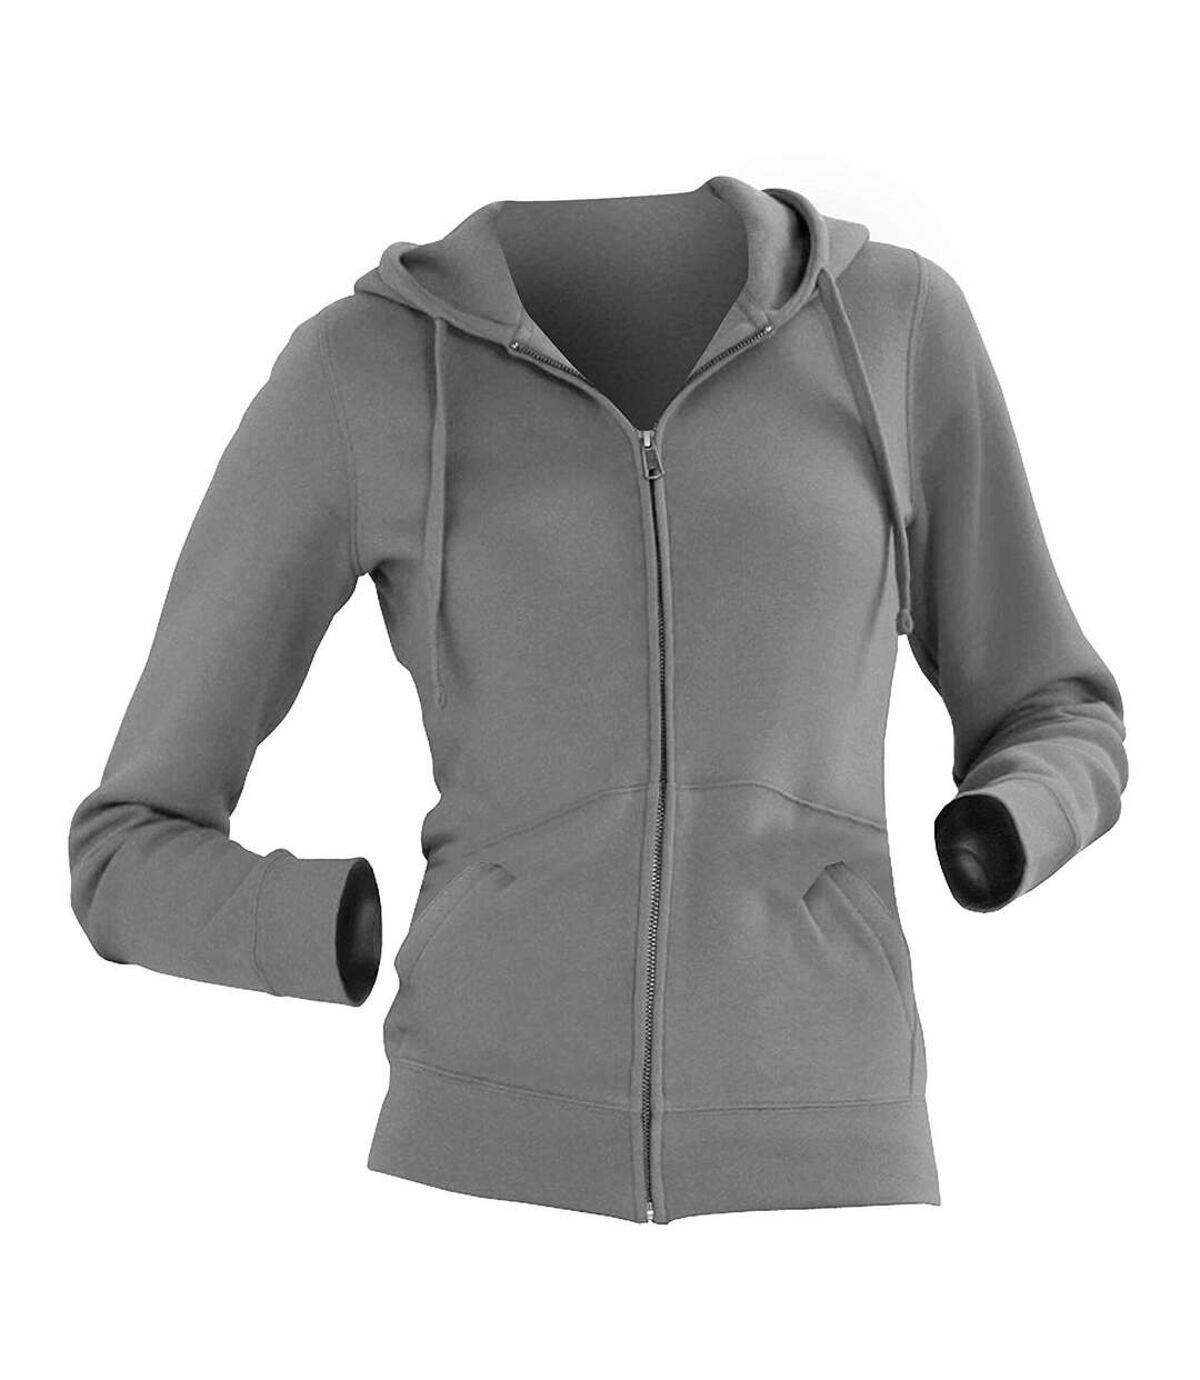 Russell Ladies Premium Authentic Zipped Hoodie (3-Layer Fabric) (Light Oxford)